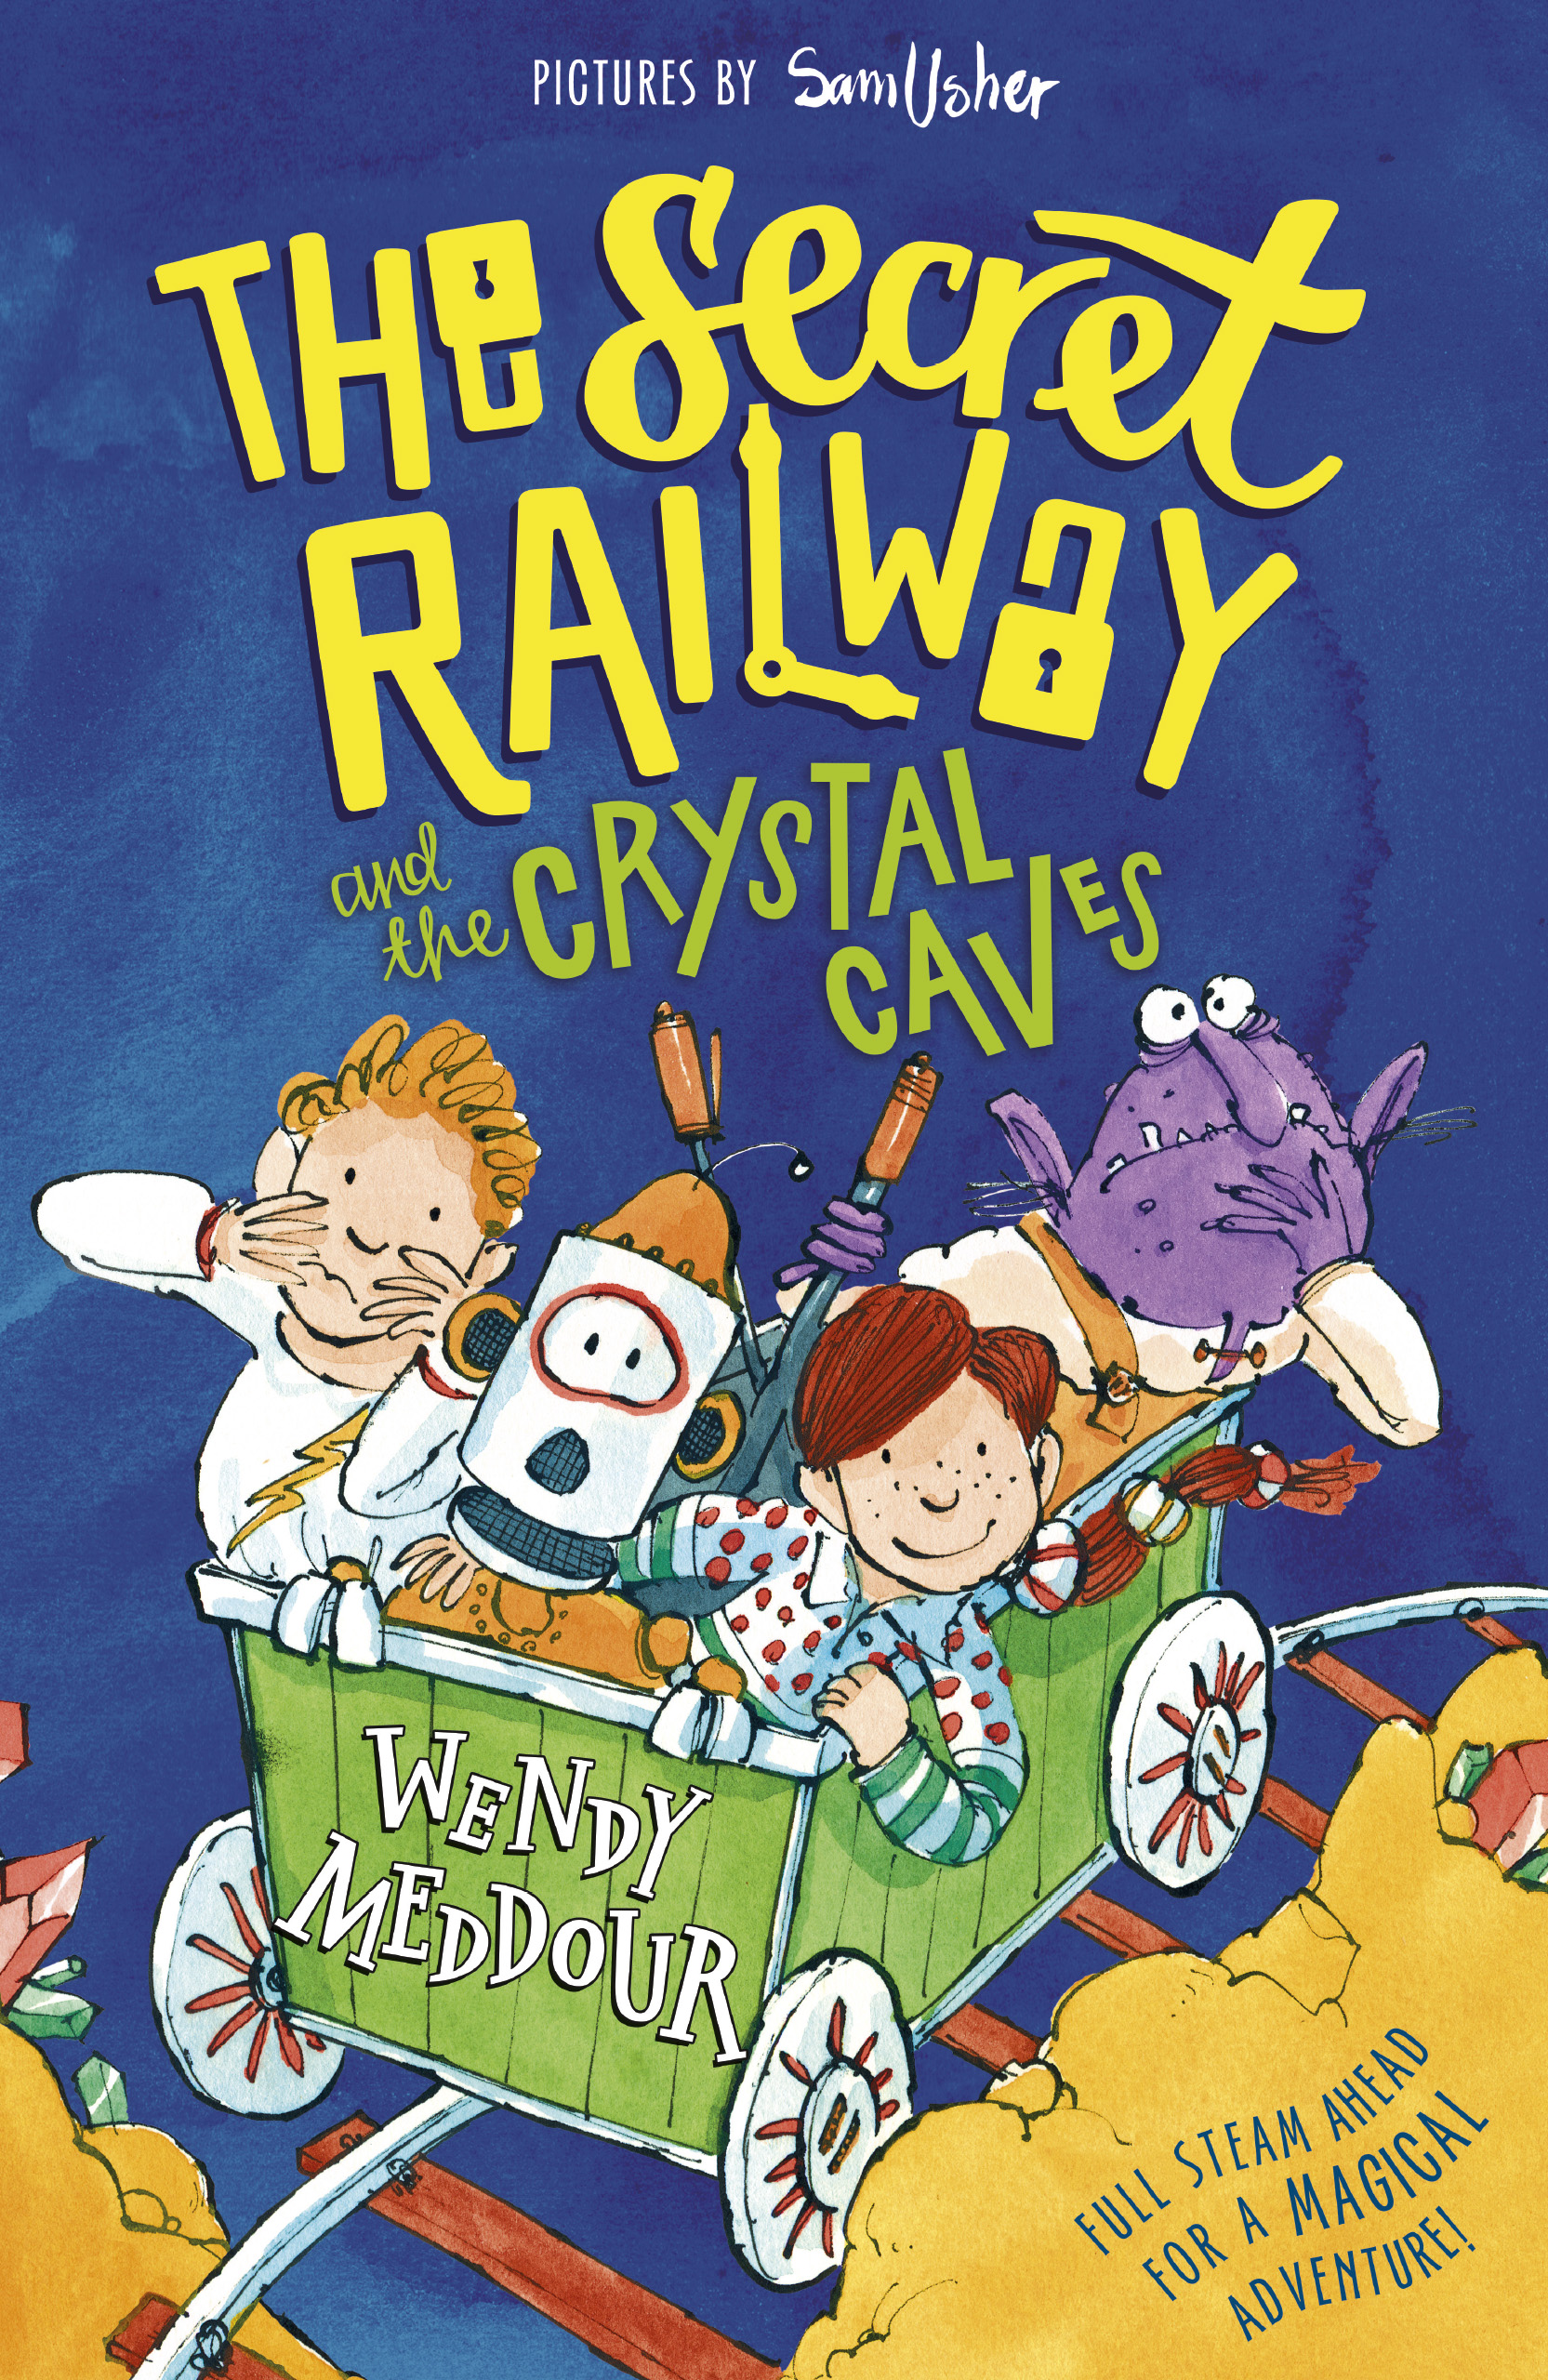 The Secret Railway and the Crystal Caves